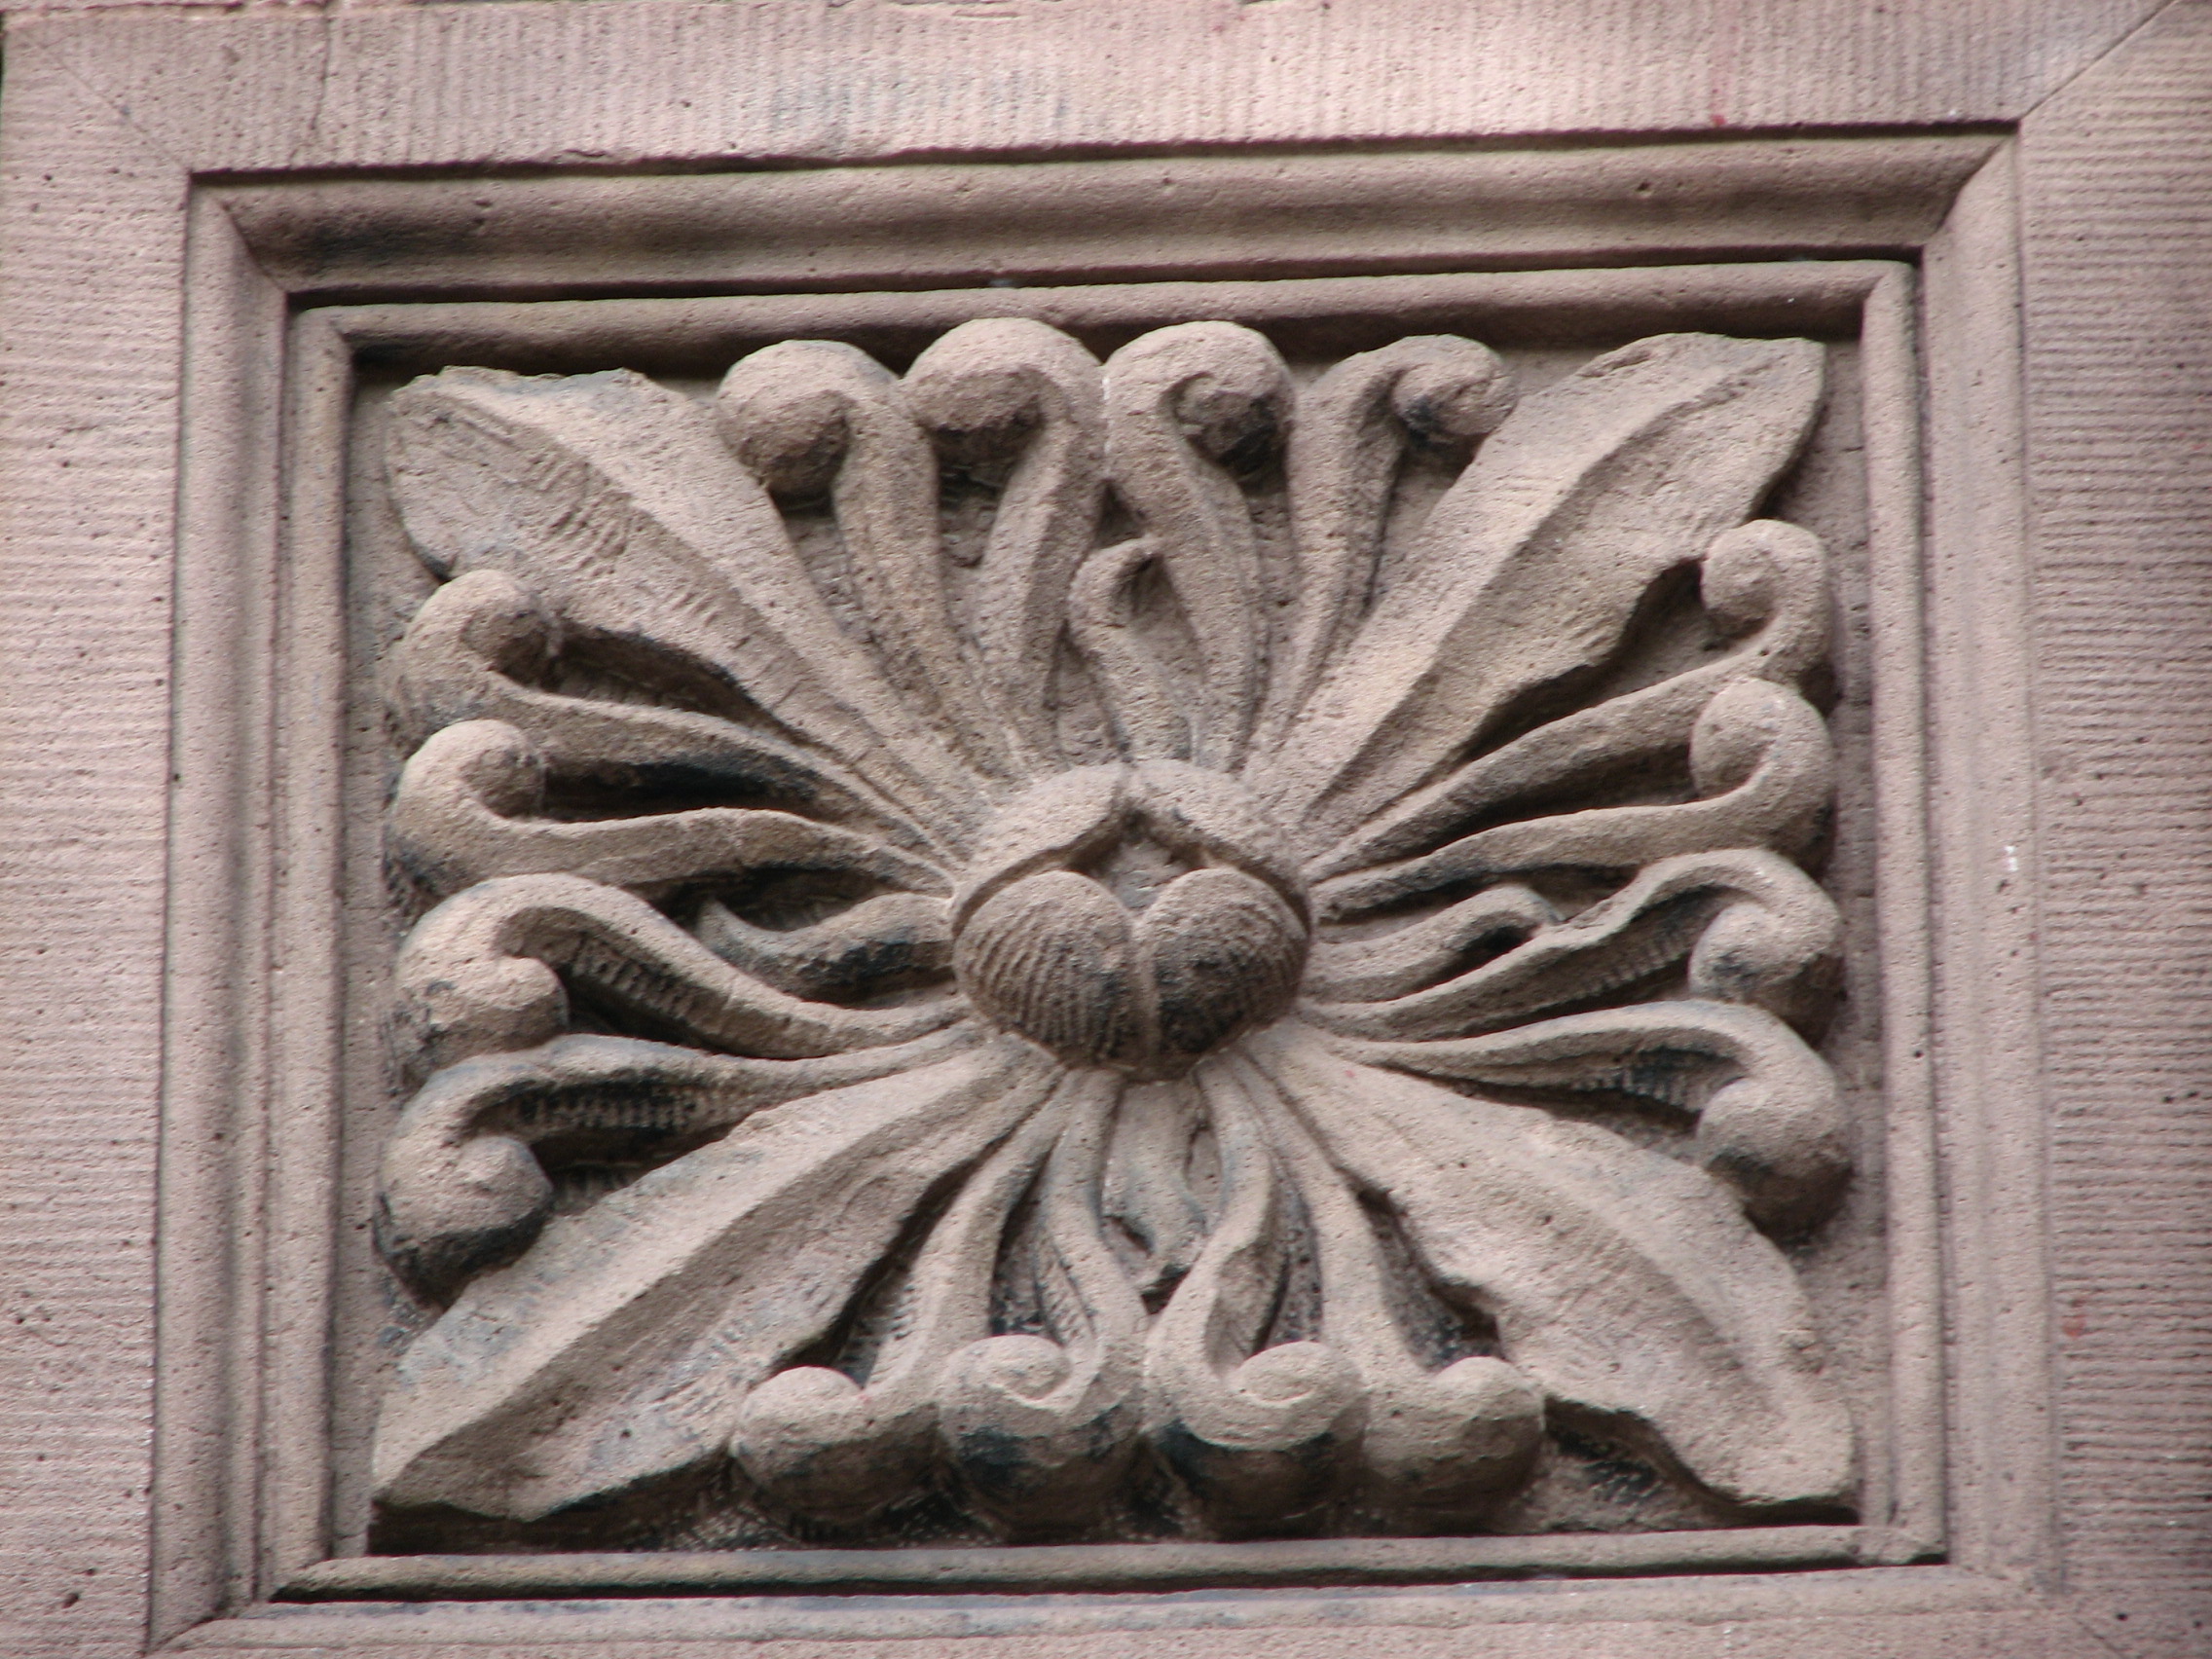 Floral designs are echoed throughout the design of the late19th century building.